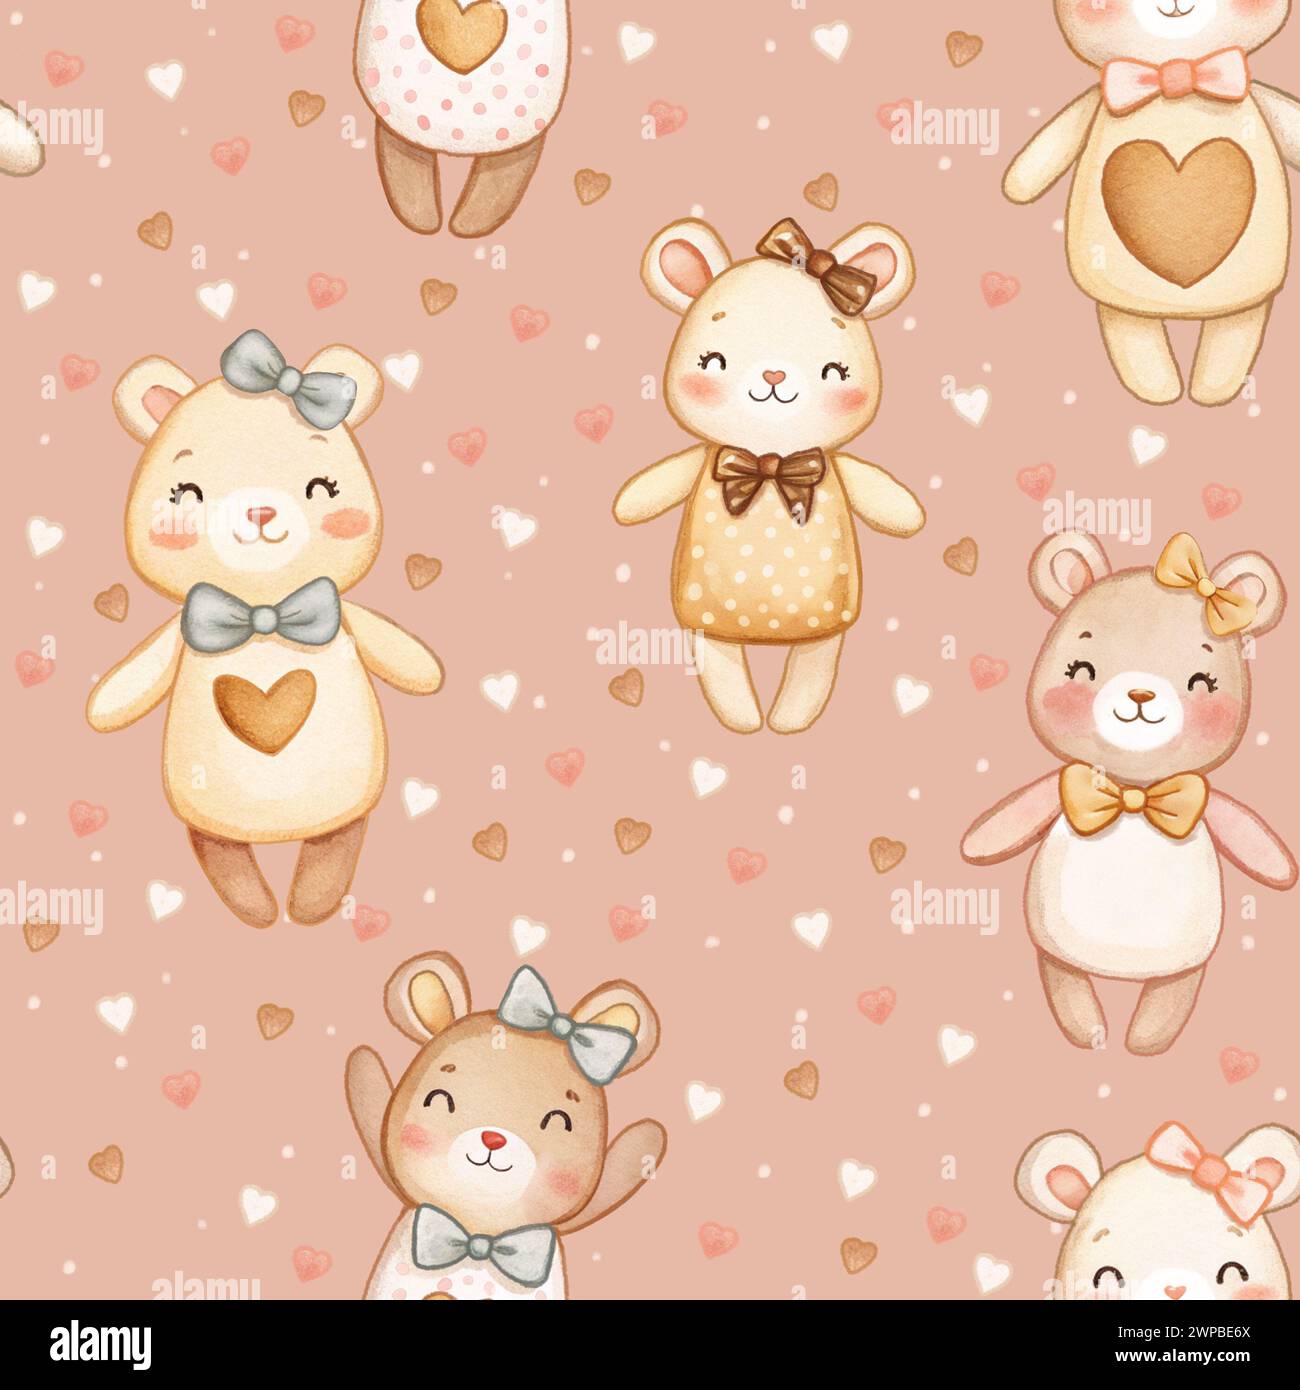 seamless pattern lovely bears pastel colors adorable cute children illustration hand made Stock Photo